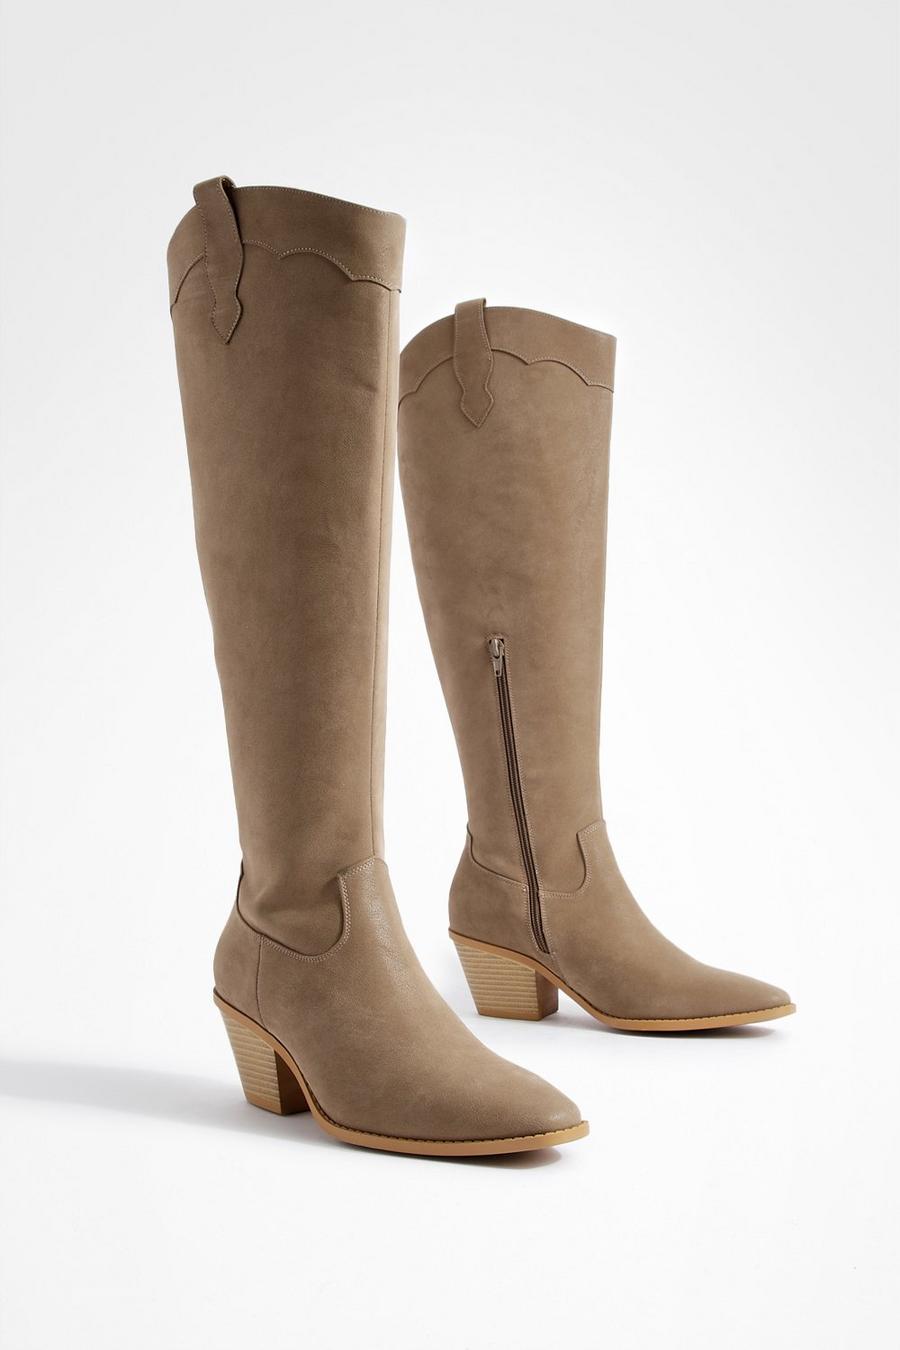 Taupe Knee High Cowboy Cowboy Boots